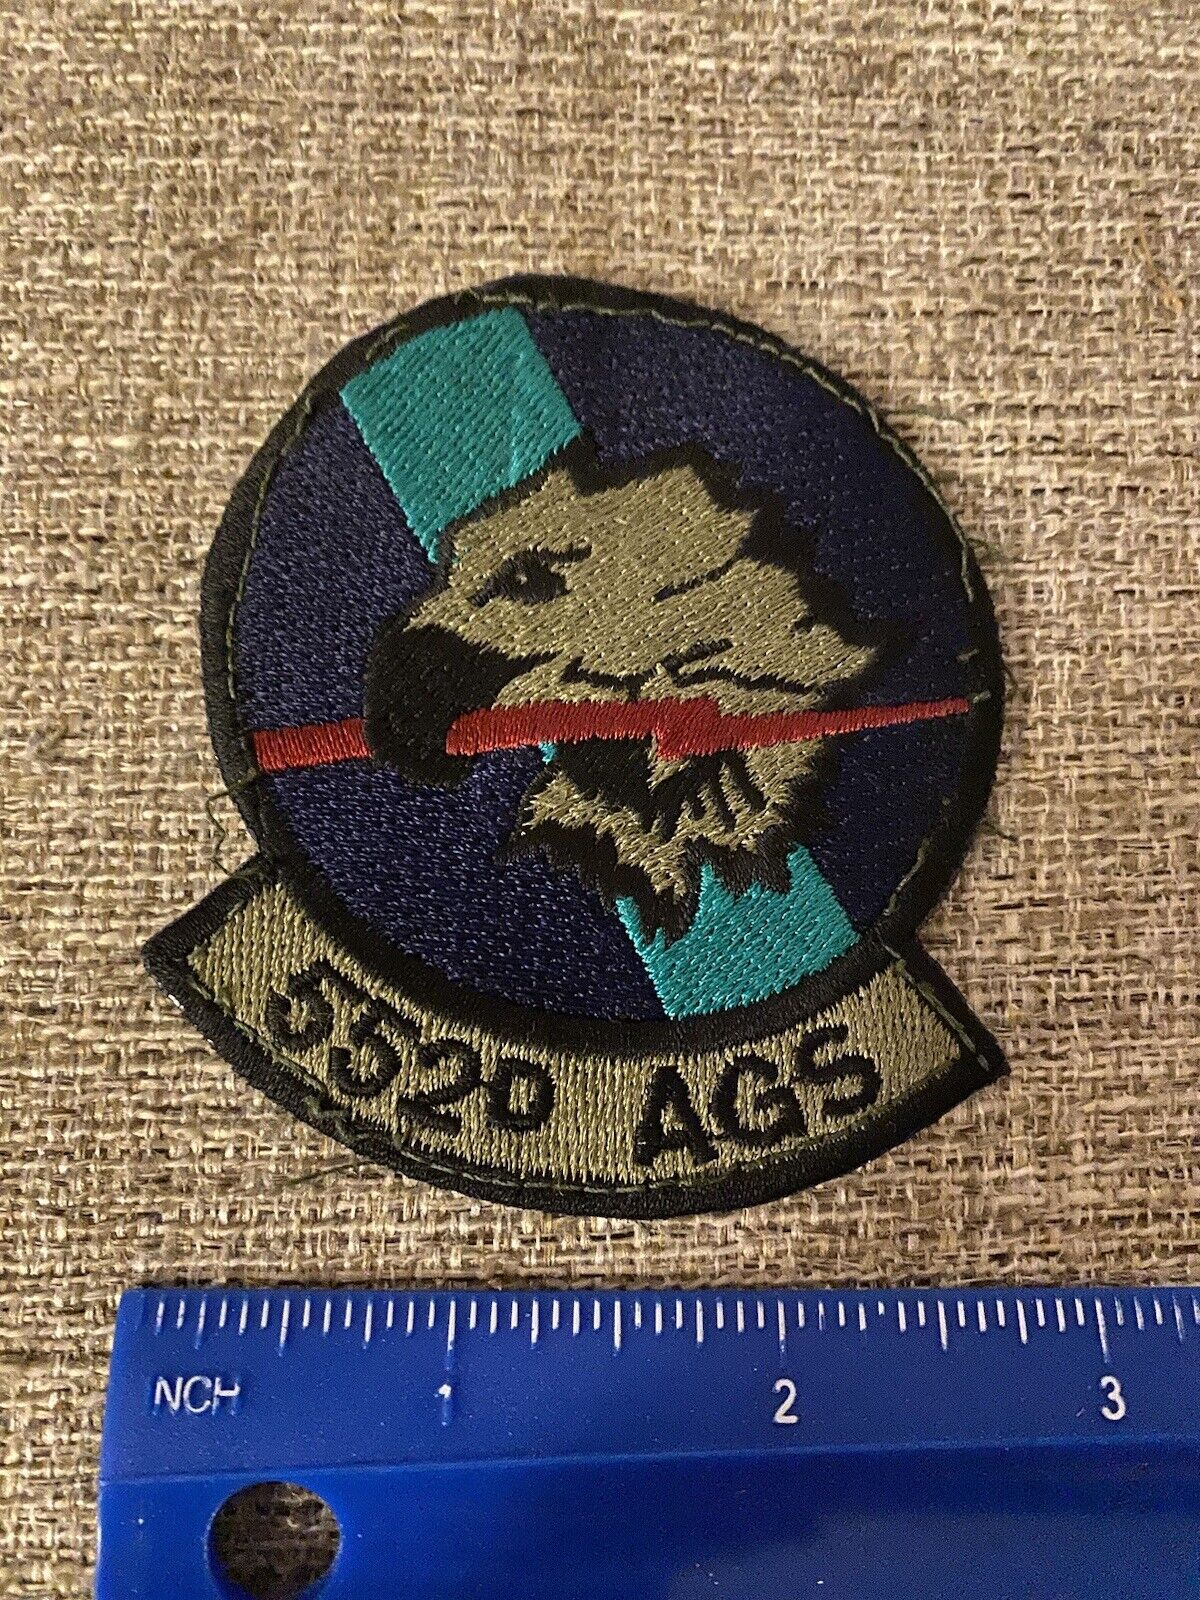 USAF 552nd AMXS AIRCRAFT MAINTENANCE SQ Squadron AMX US Air Force Patch INV2958